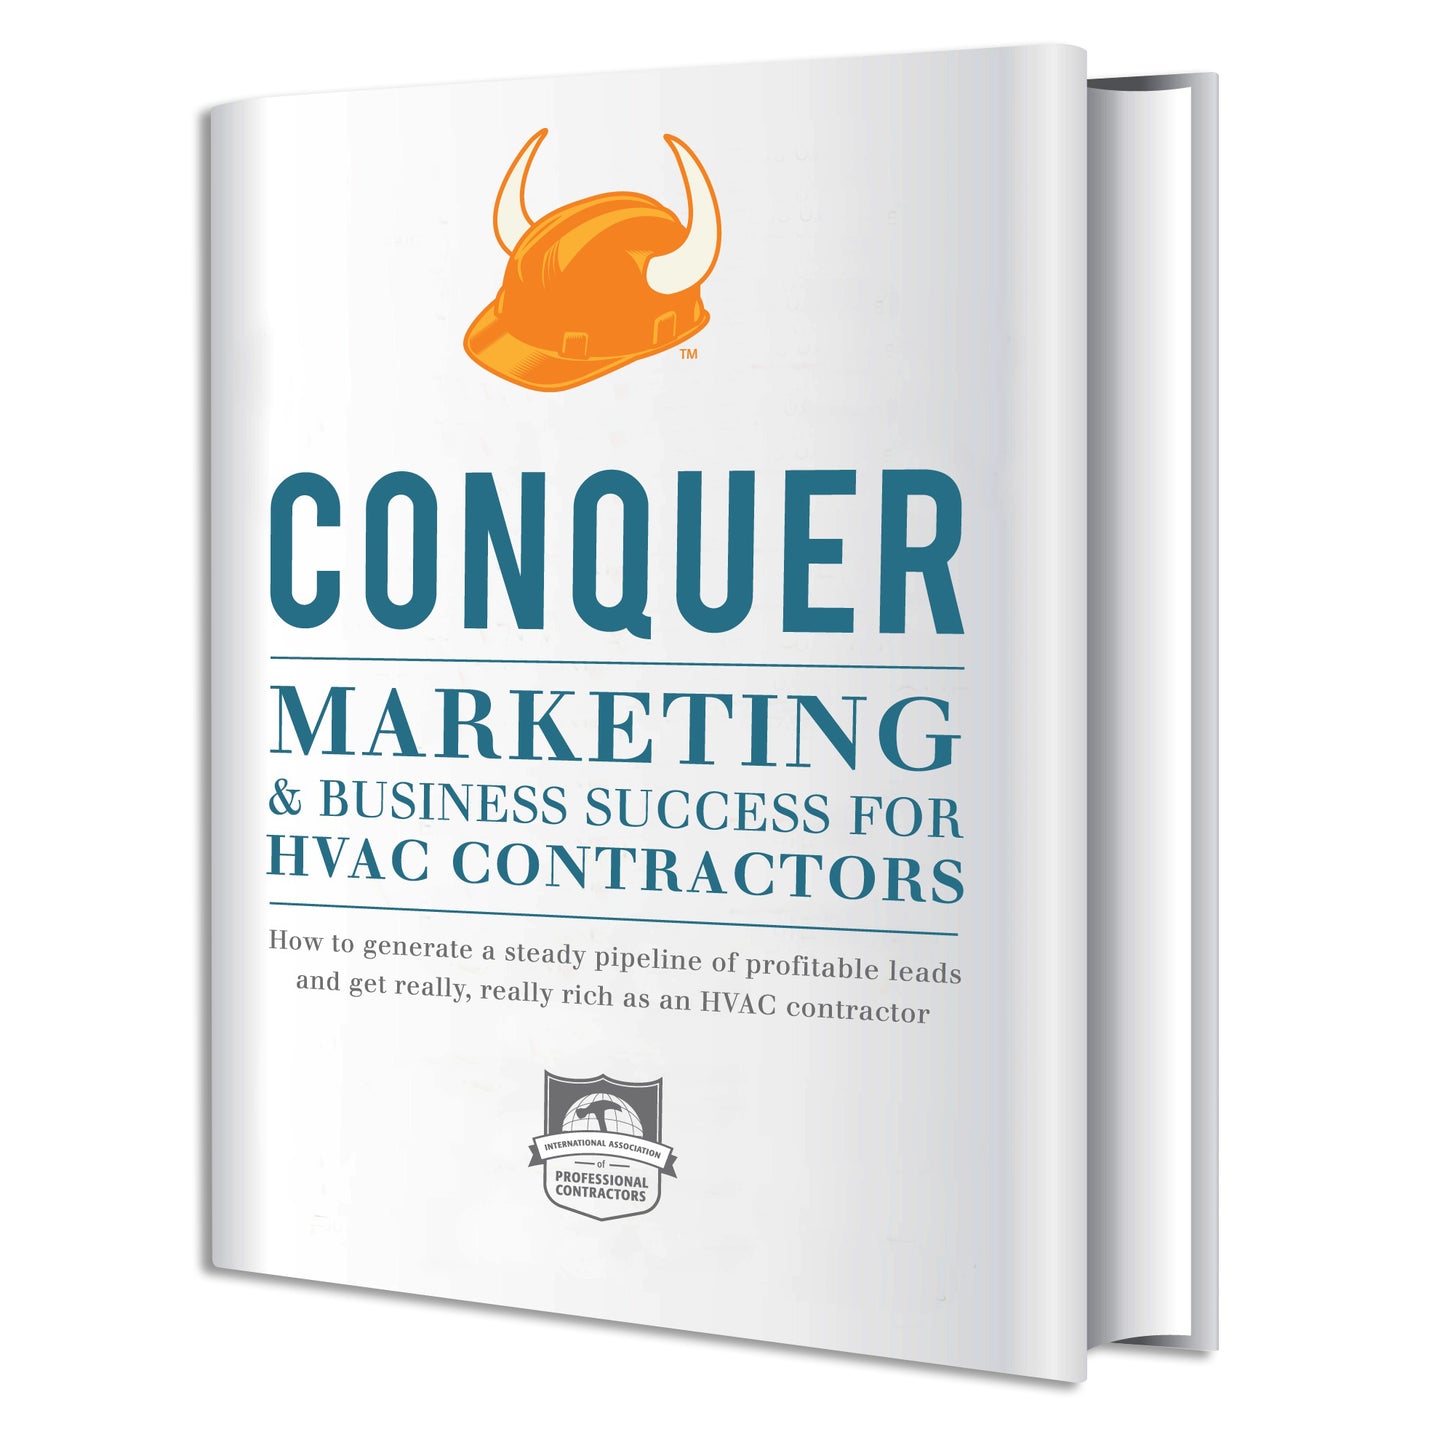 CONQUER Marketing and Business Success for HVAC Contractors PDF